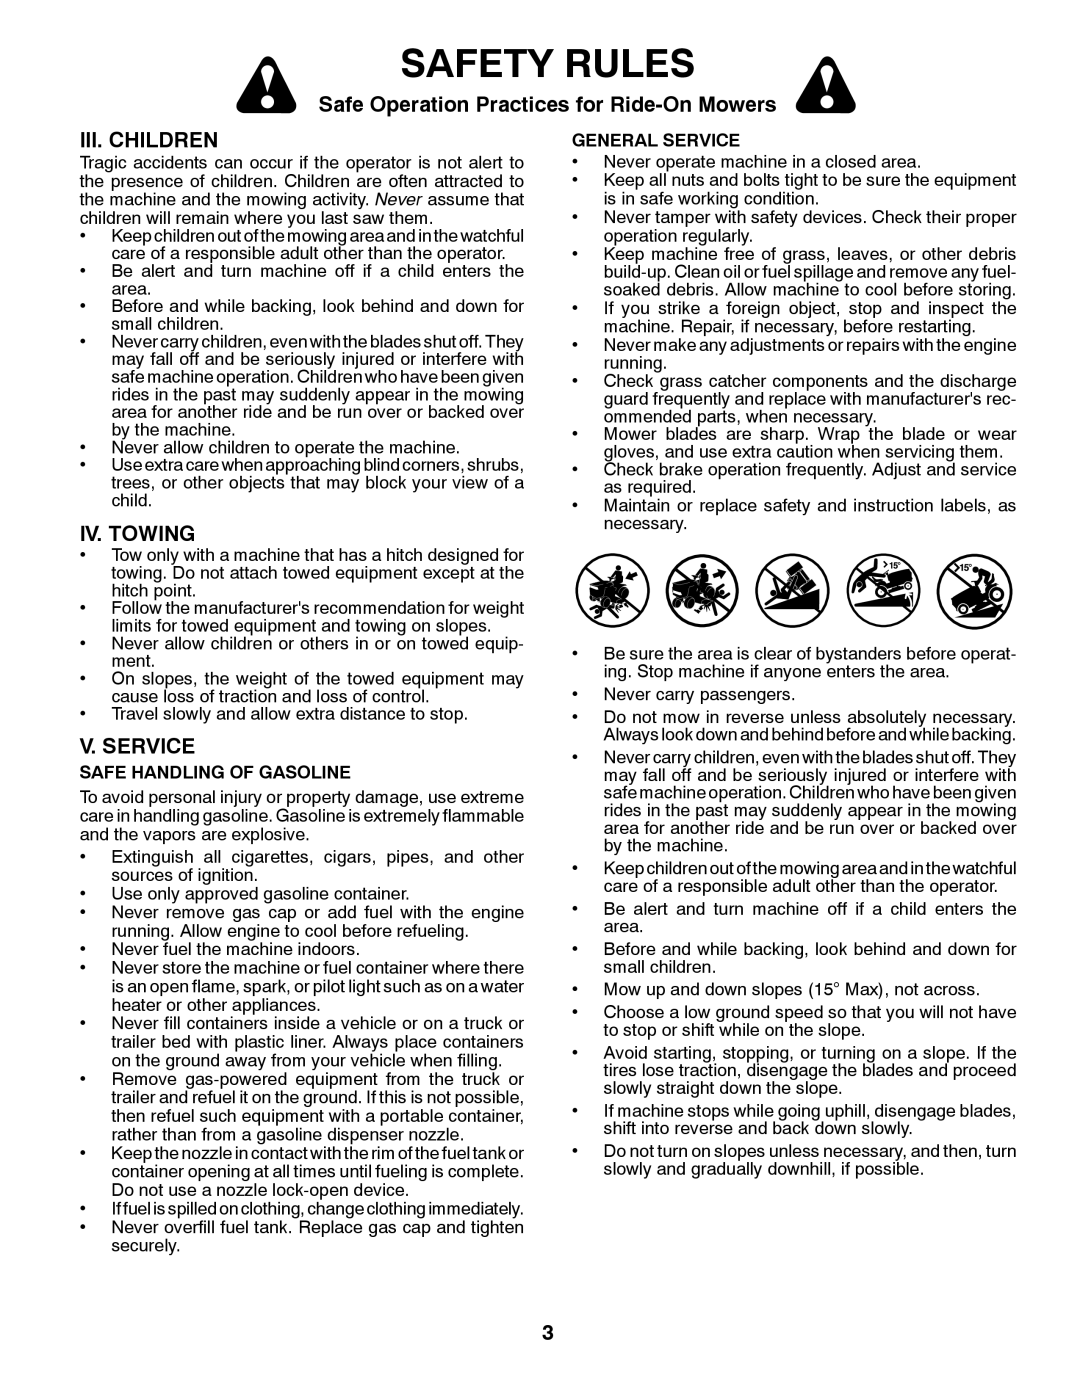 Husqvarna 532 42 32-01 Iii. Children, Iv. Towing, V. Service, Safety Rules, Safe Operation Practices for Ride-On Mowers 